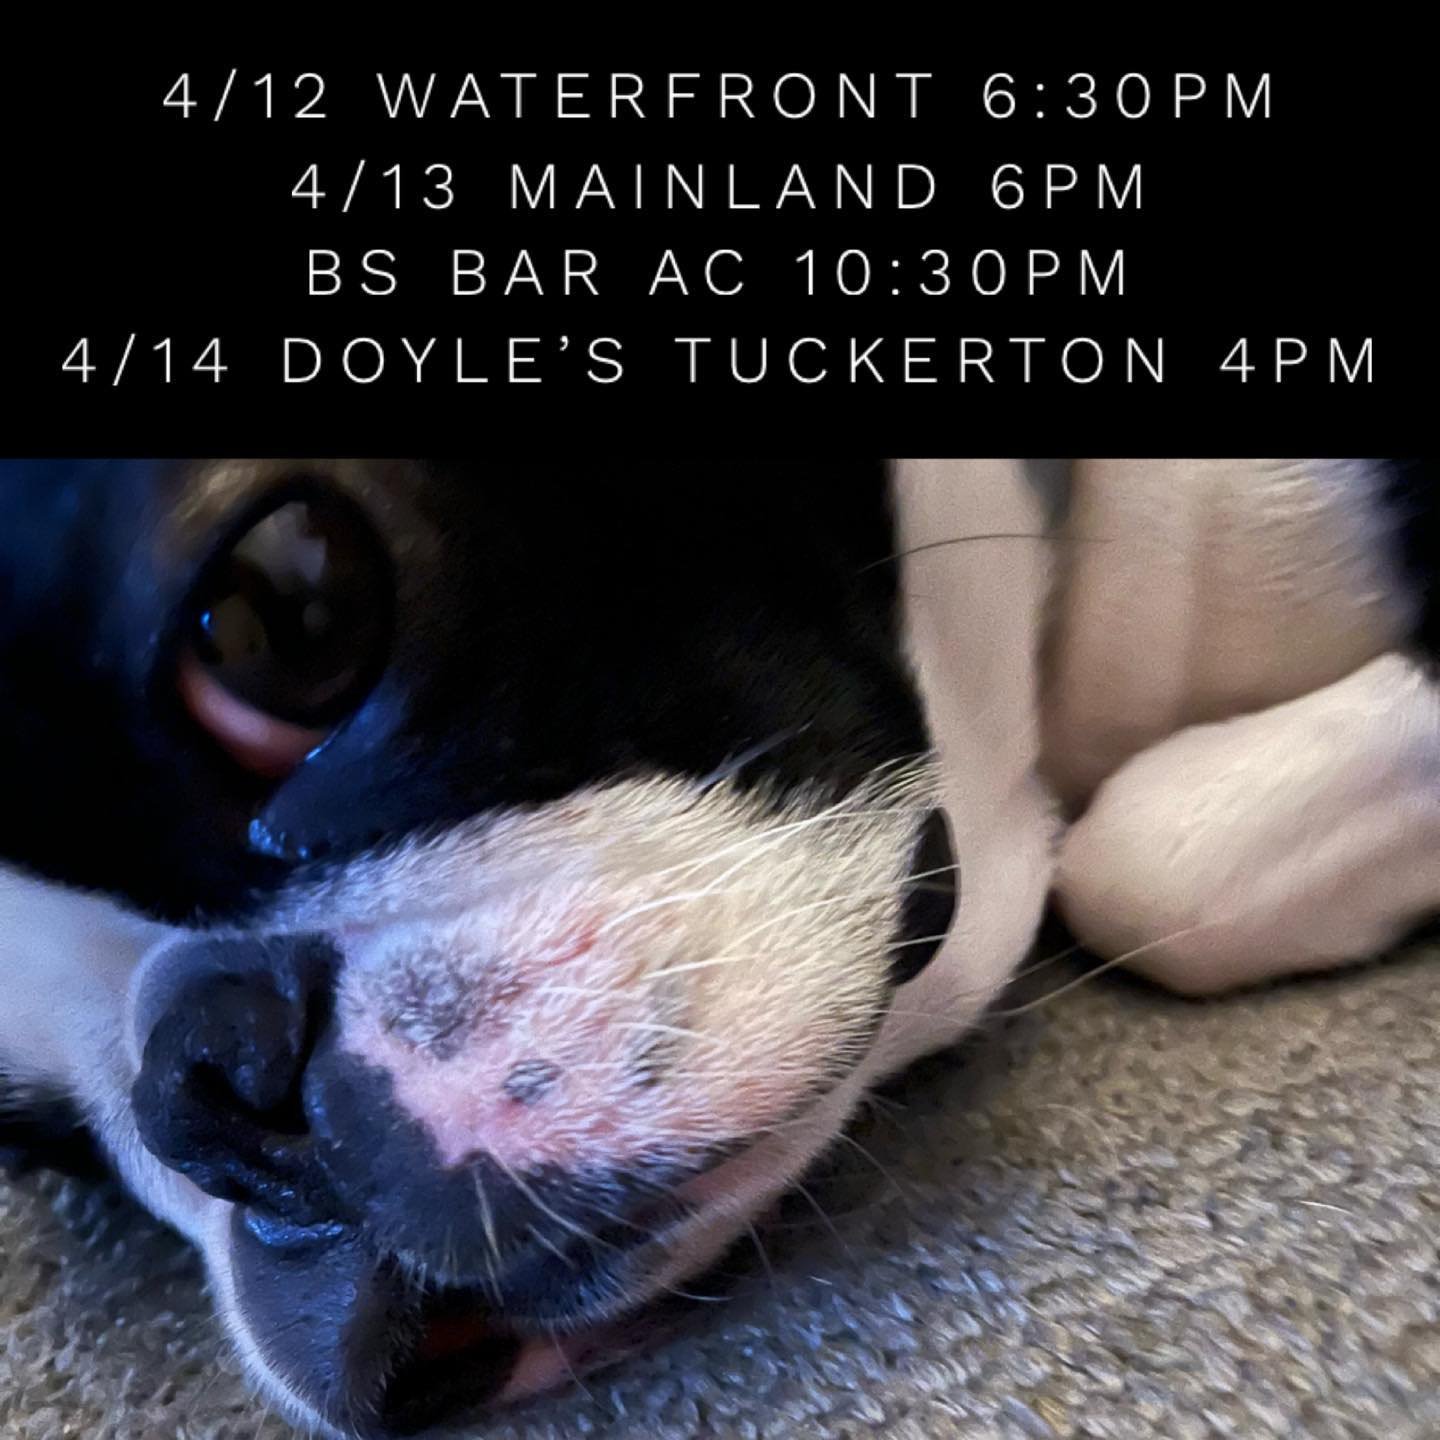 Busy weekend of gigs. Come on out and spend that tax refund!  #livemusic #bostonterrier #waterfront #forkedriver #mainland #manahawkin #bsbar #atlanticcity #doylespourhouse #tuckerton